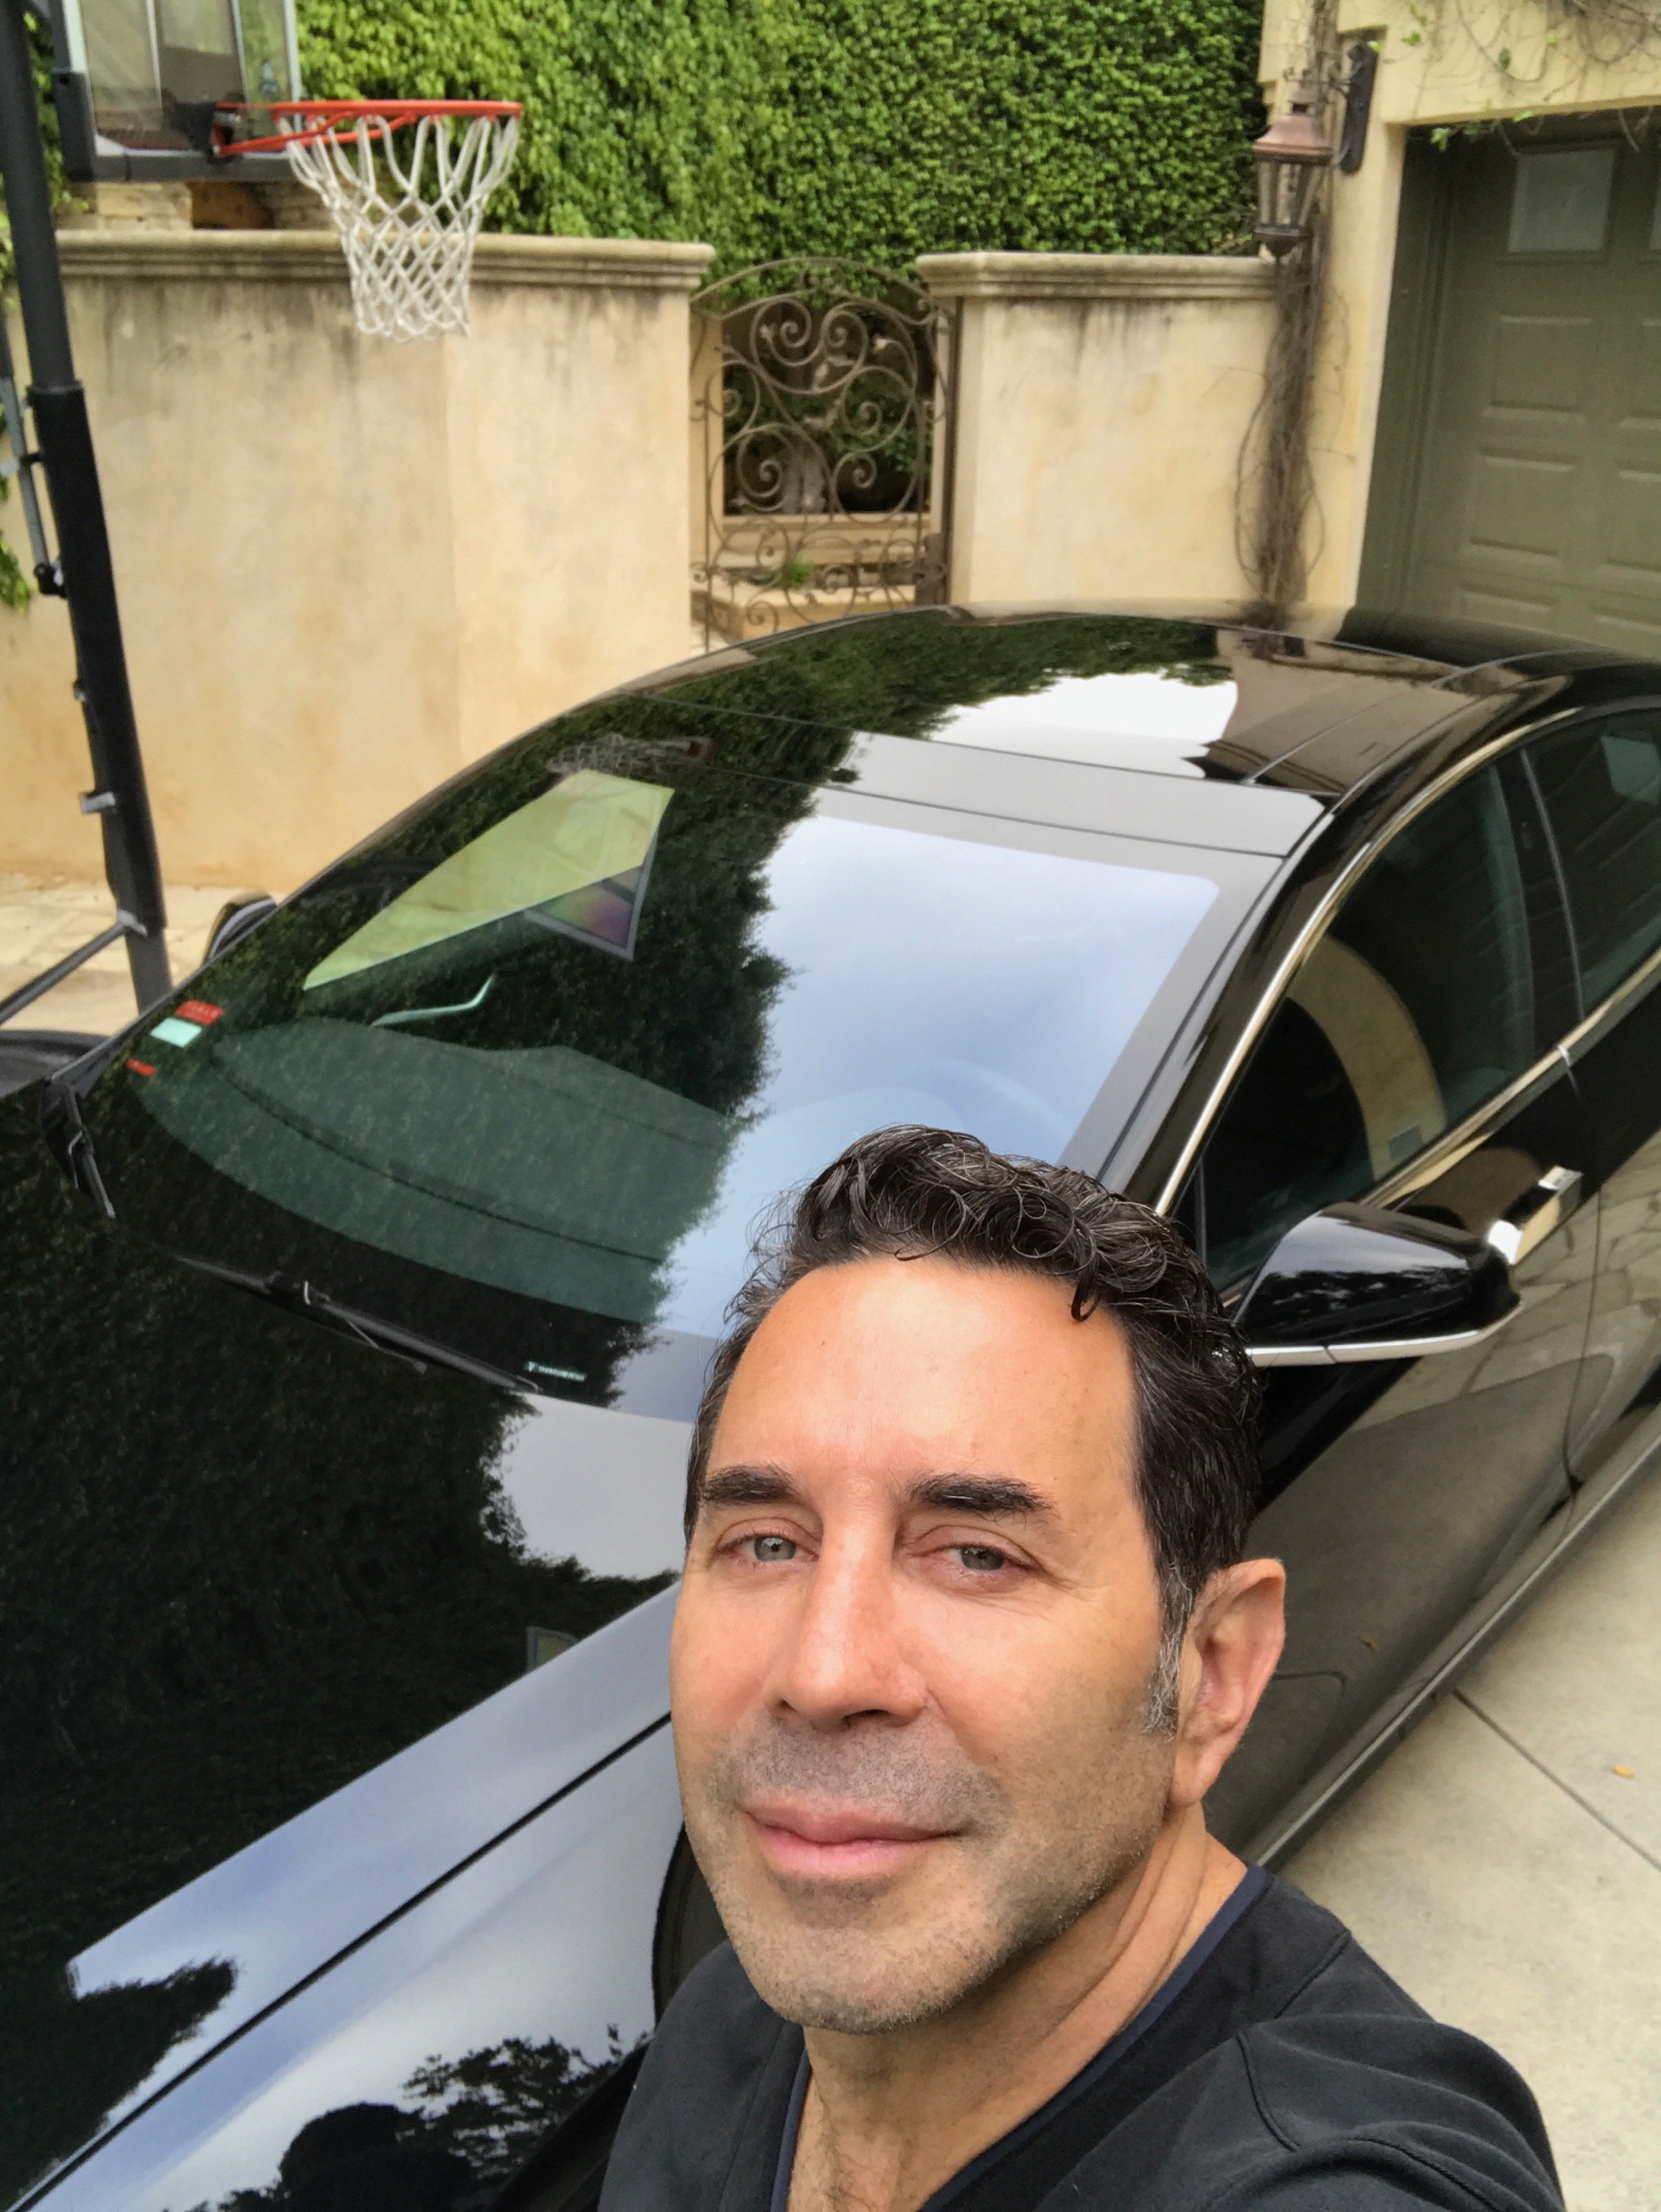 Dr. Paul Nassif - I hope everyone has a great weekend! 😎🎉